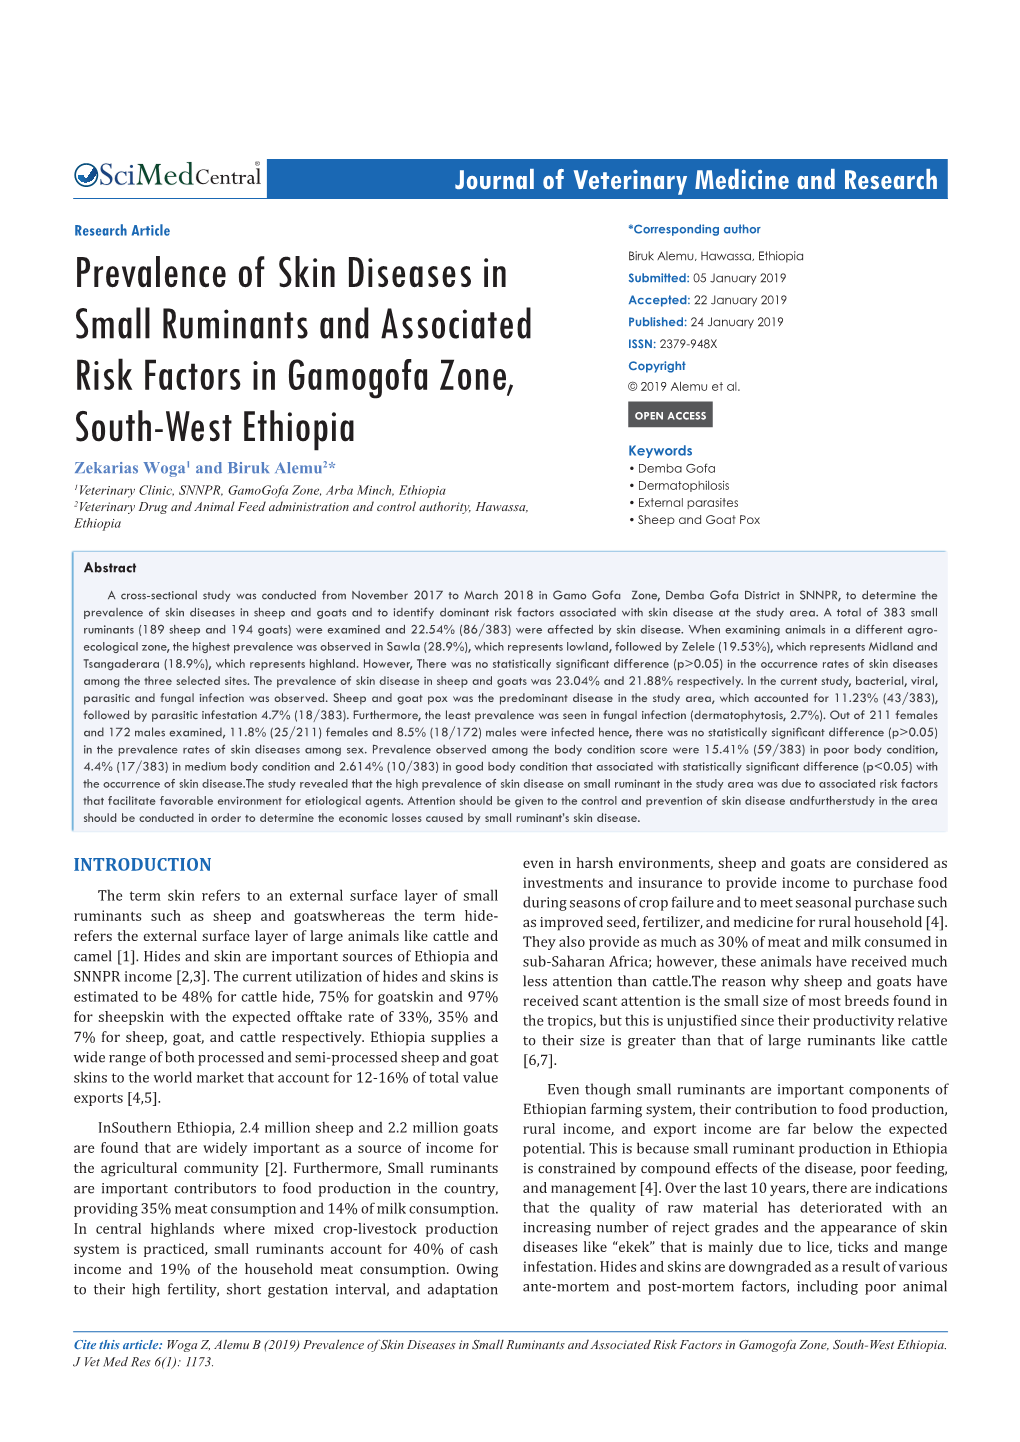 Prevalence of Skin Diseases in Small Ruminants and Associated Risk Factors in Gamogofa Zone, South-West Ethiopia